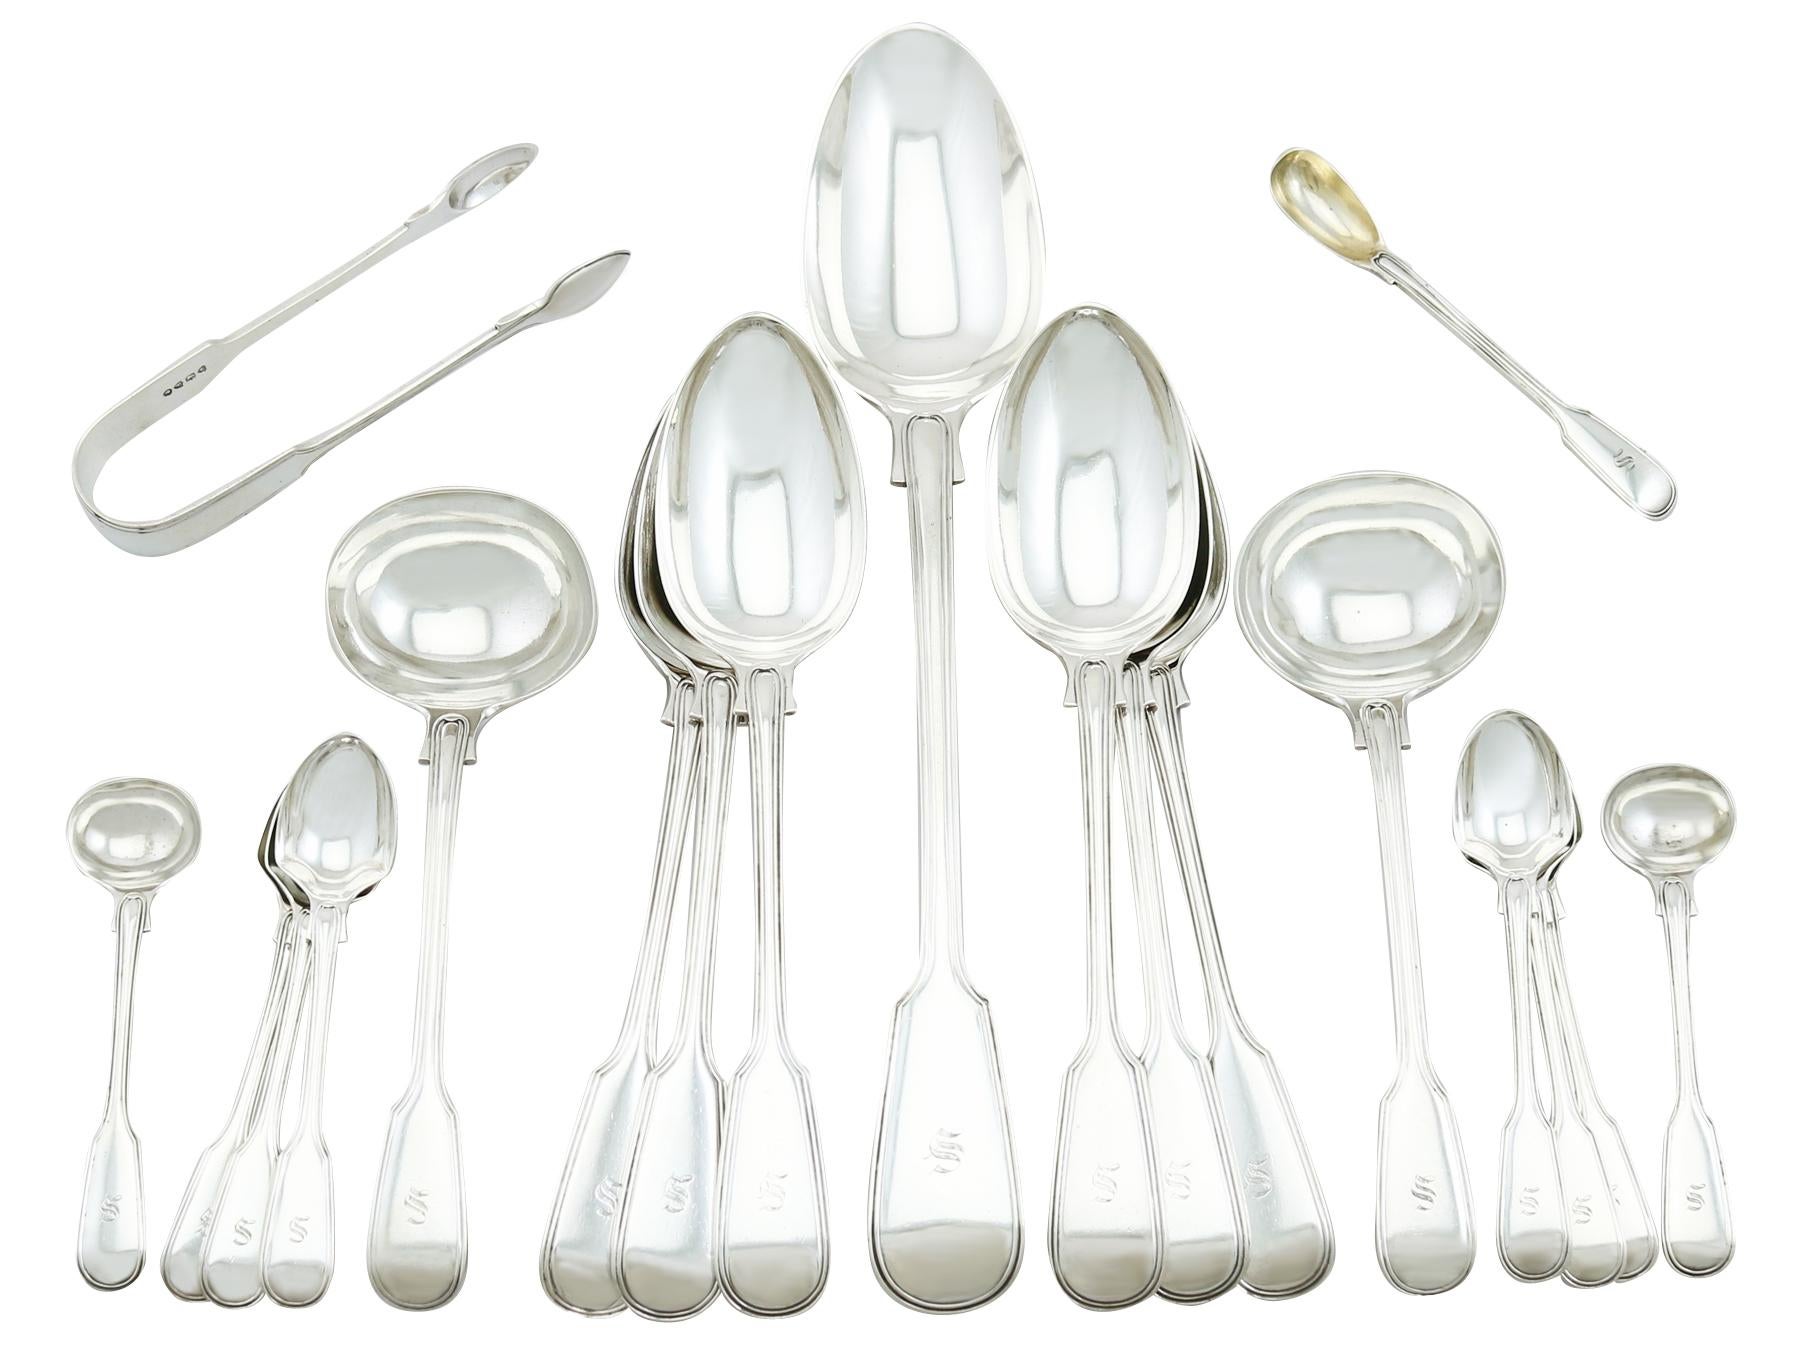 An exceptional, fine and impressive antique Victorian English sterling silver straight fiddle and thread flatware service for ten persons made by George Adams, an addition to our canteen of cutlery collection.

The pieces of this exceptional